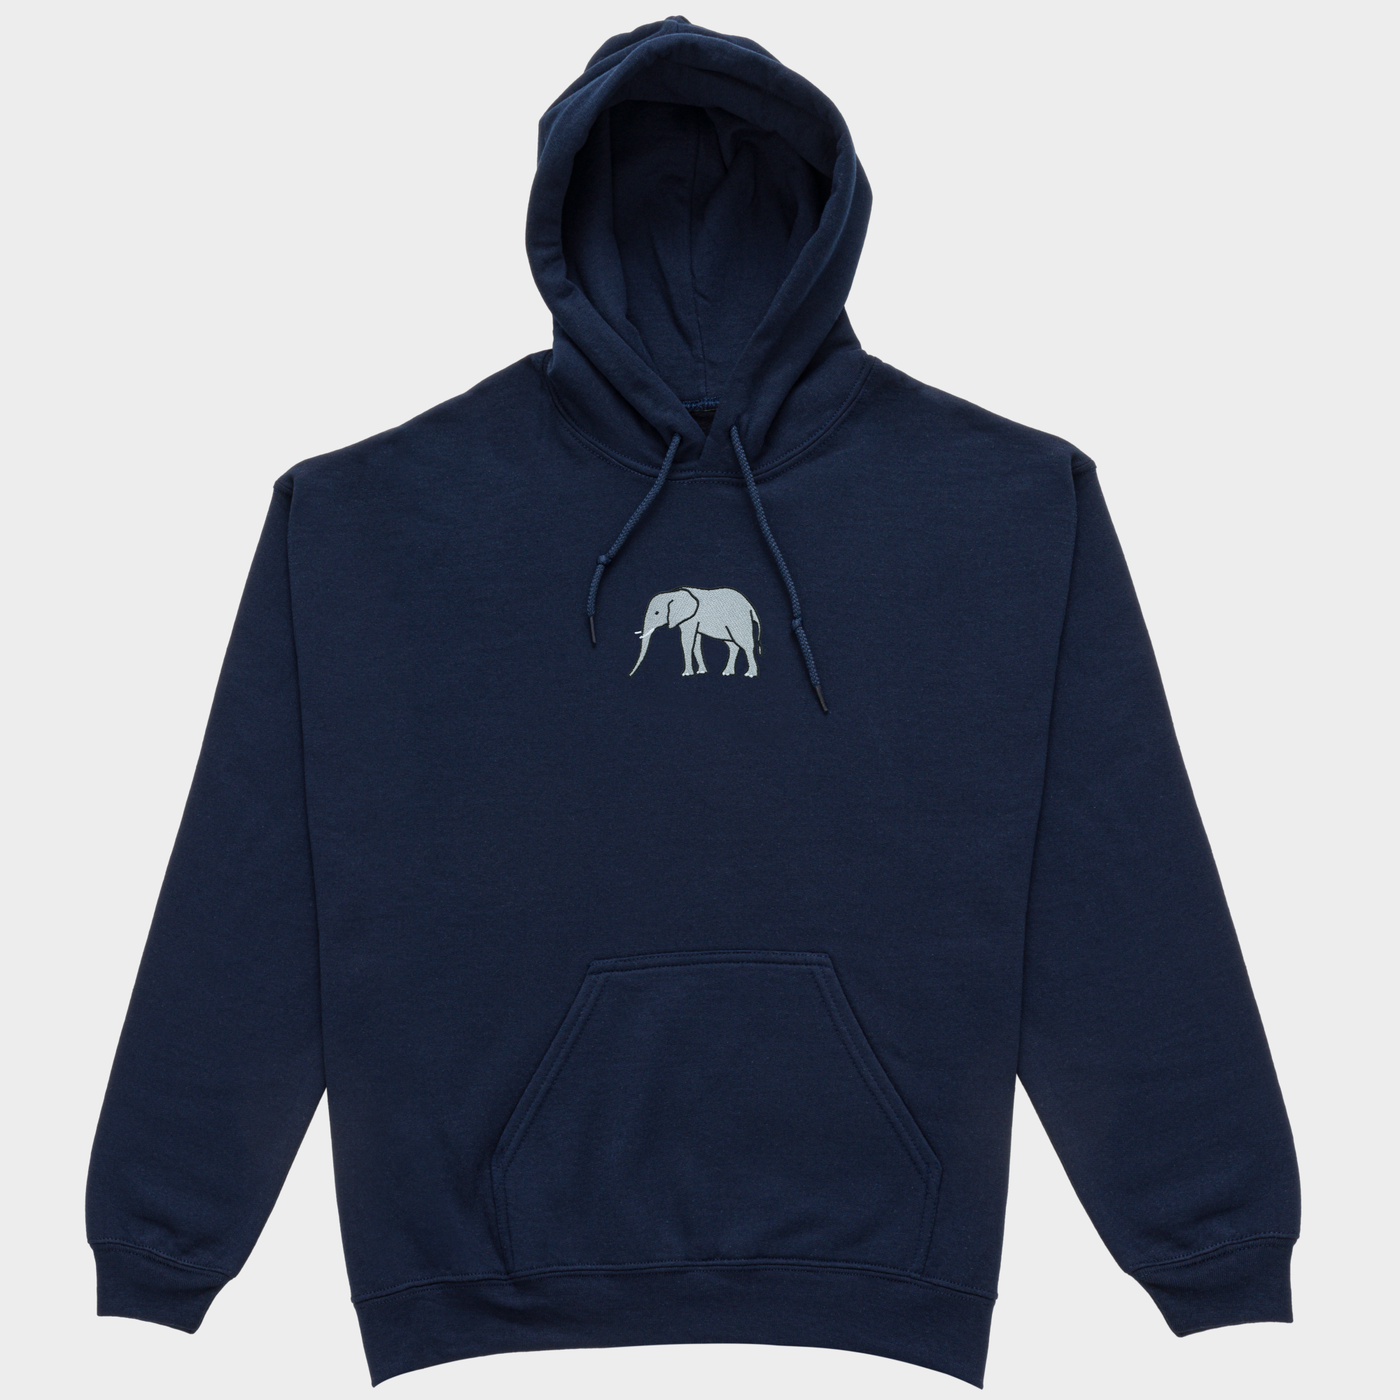 Bobby's Planet Men's Embroidered Elephant Hoodie from African Animals Collection in Navy Color#color_navy